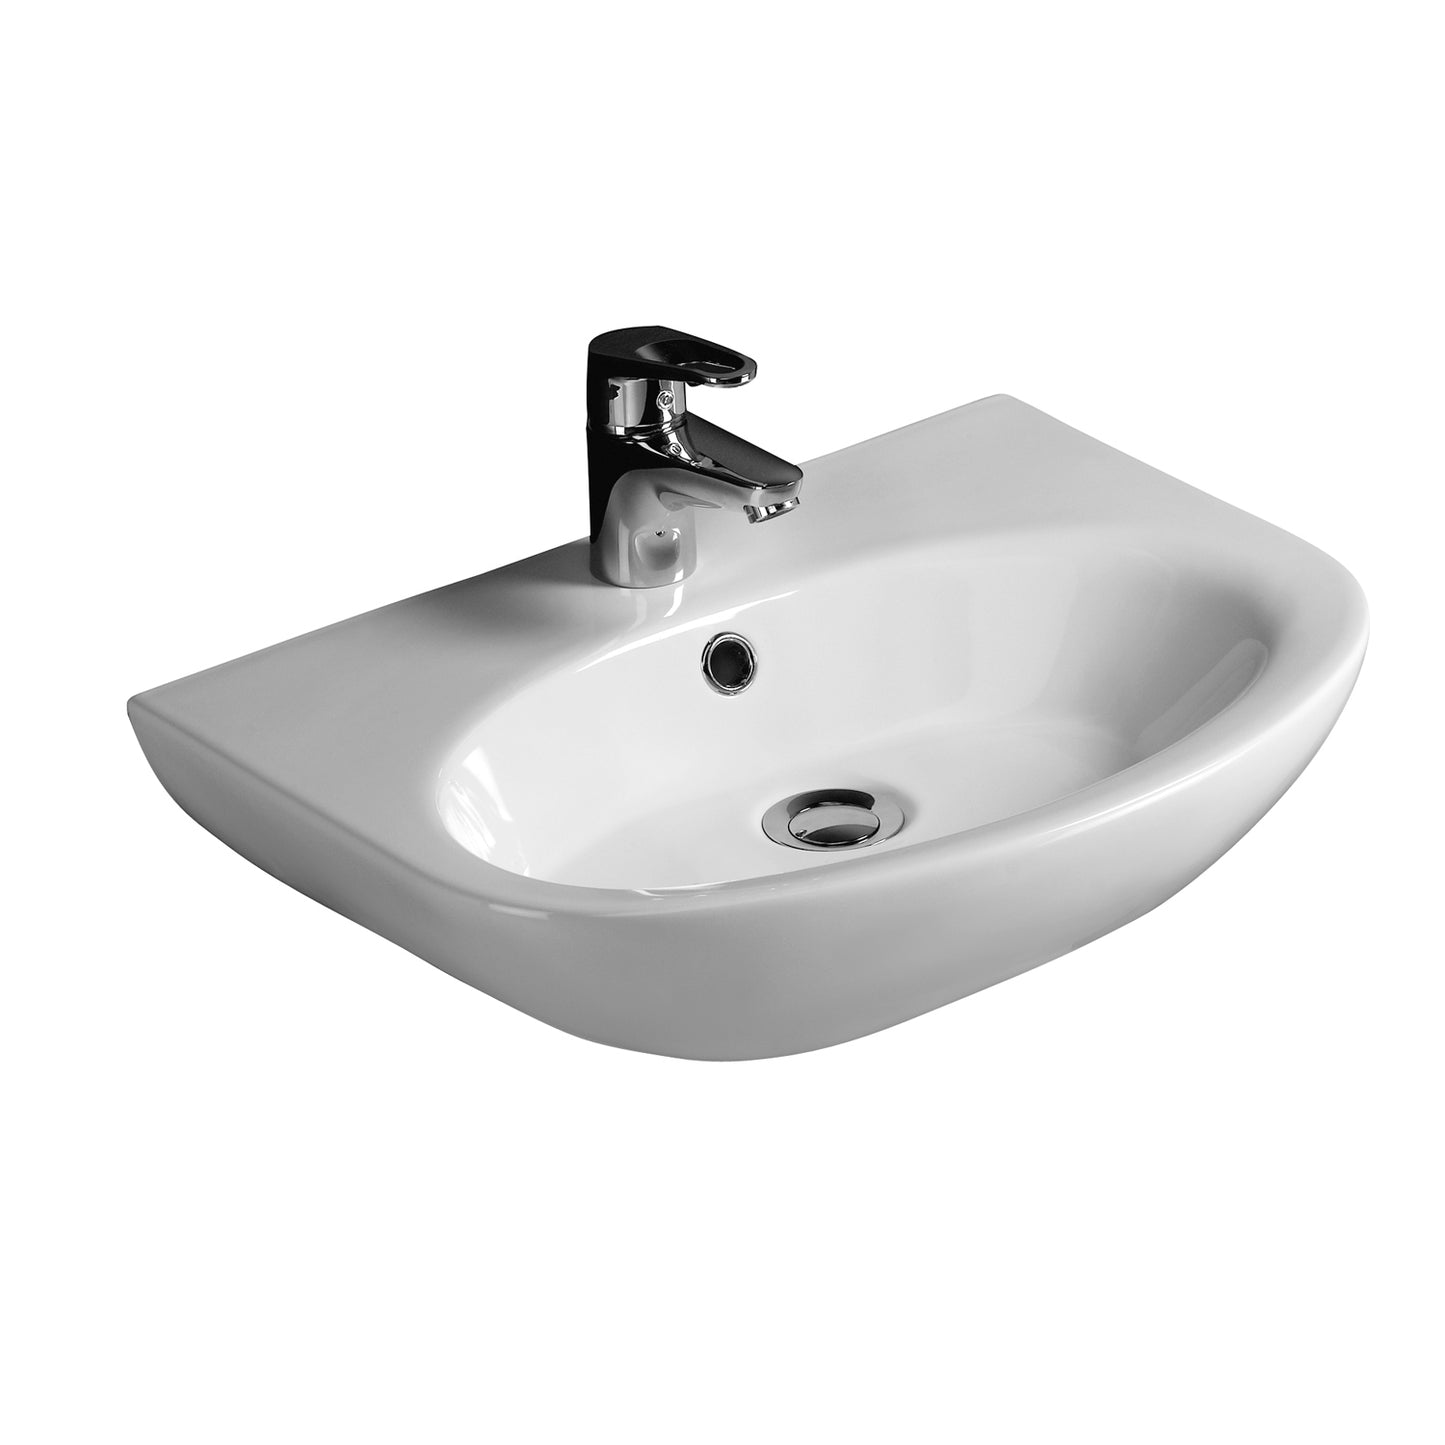 Infinity 500 Wall Hung Sink with 1 Faucet Hole and Overflow White